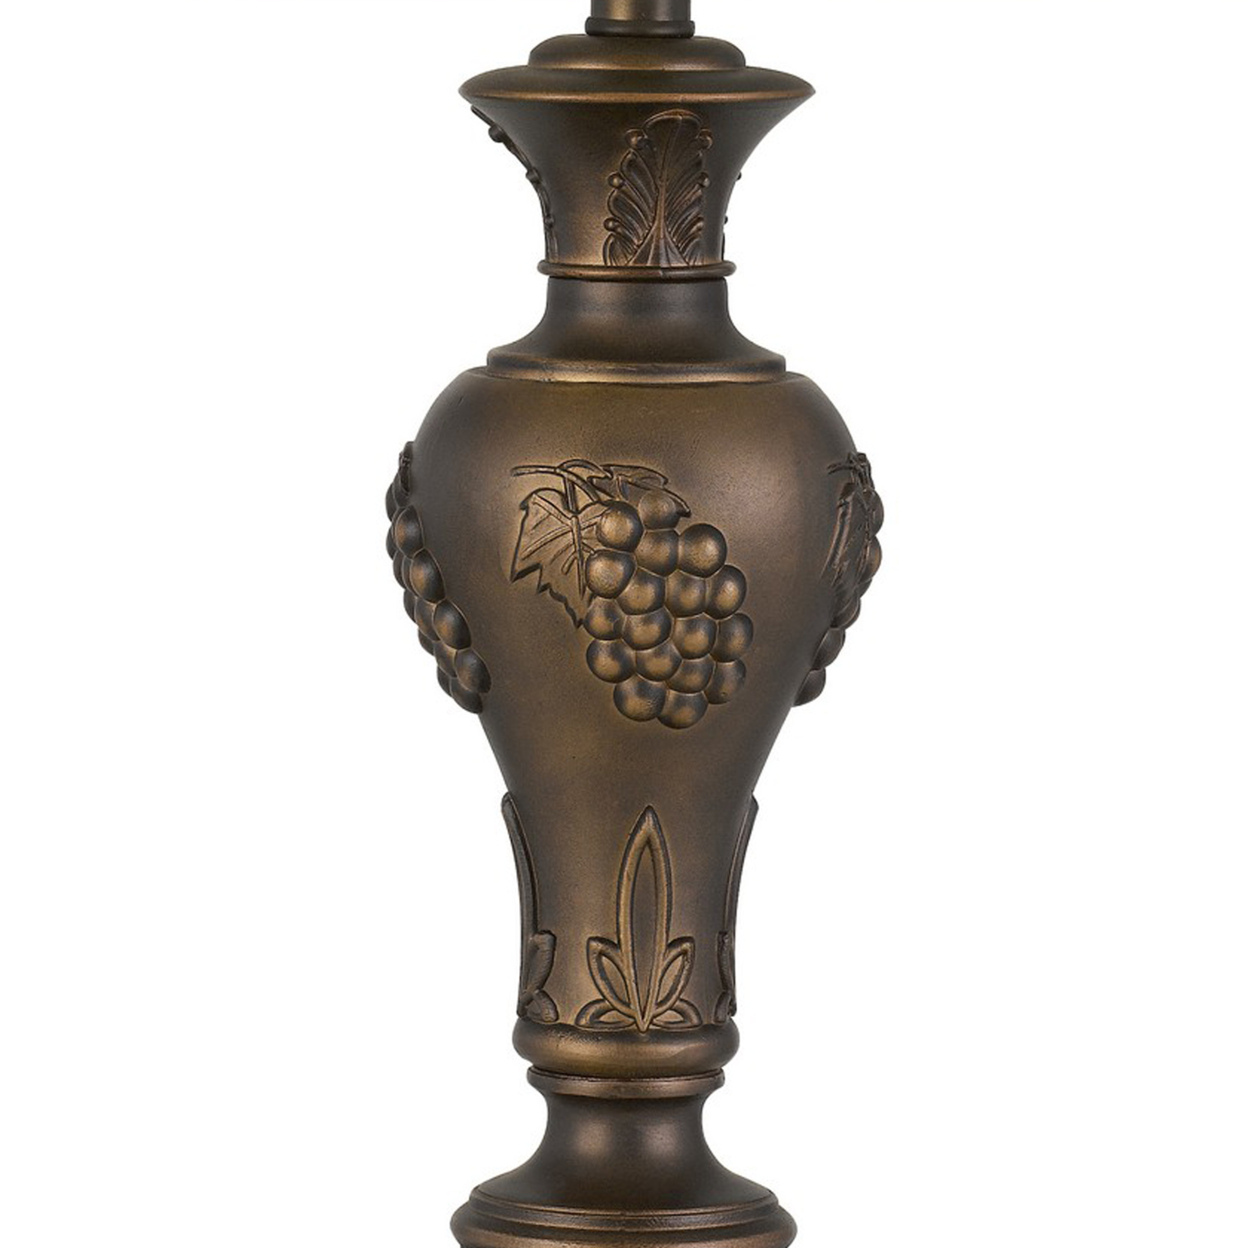 Metal Vase Design Base Table Lamp With Carved Accents, Antique Brass- Saltoro Sherpi